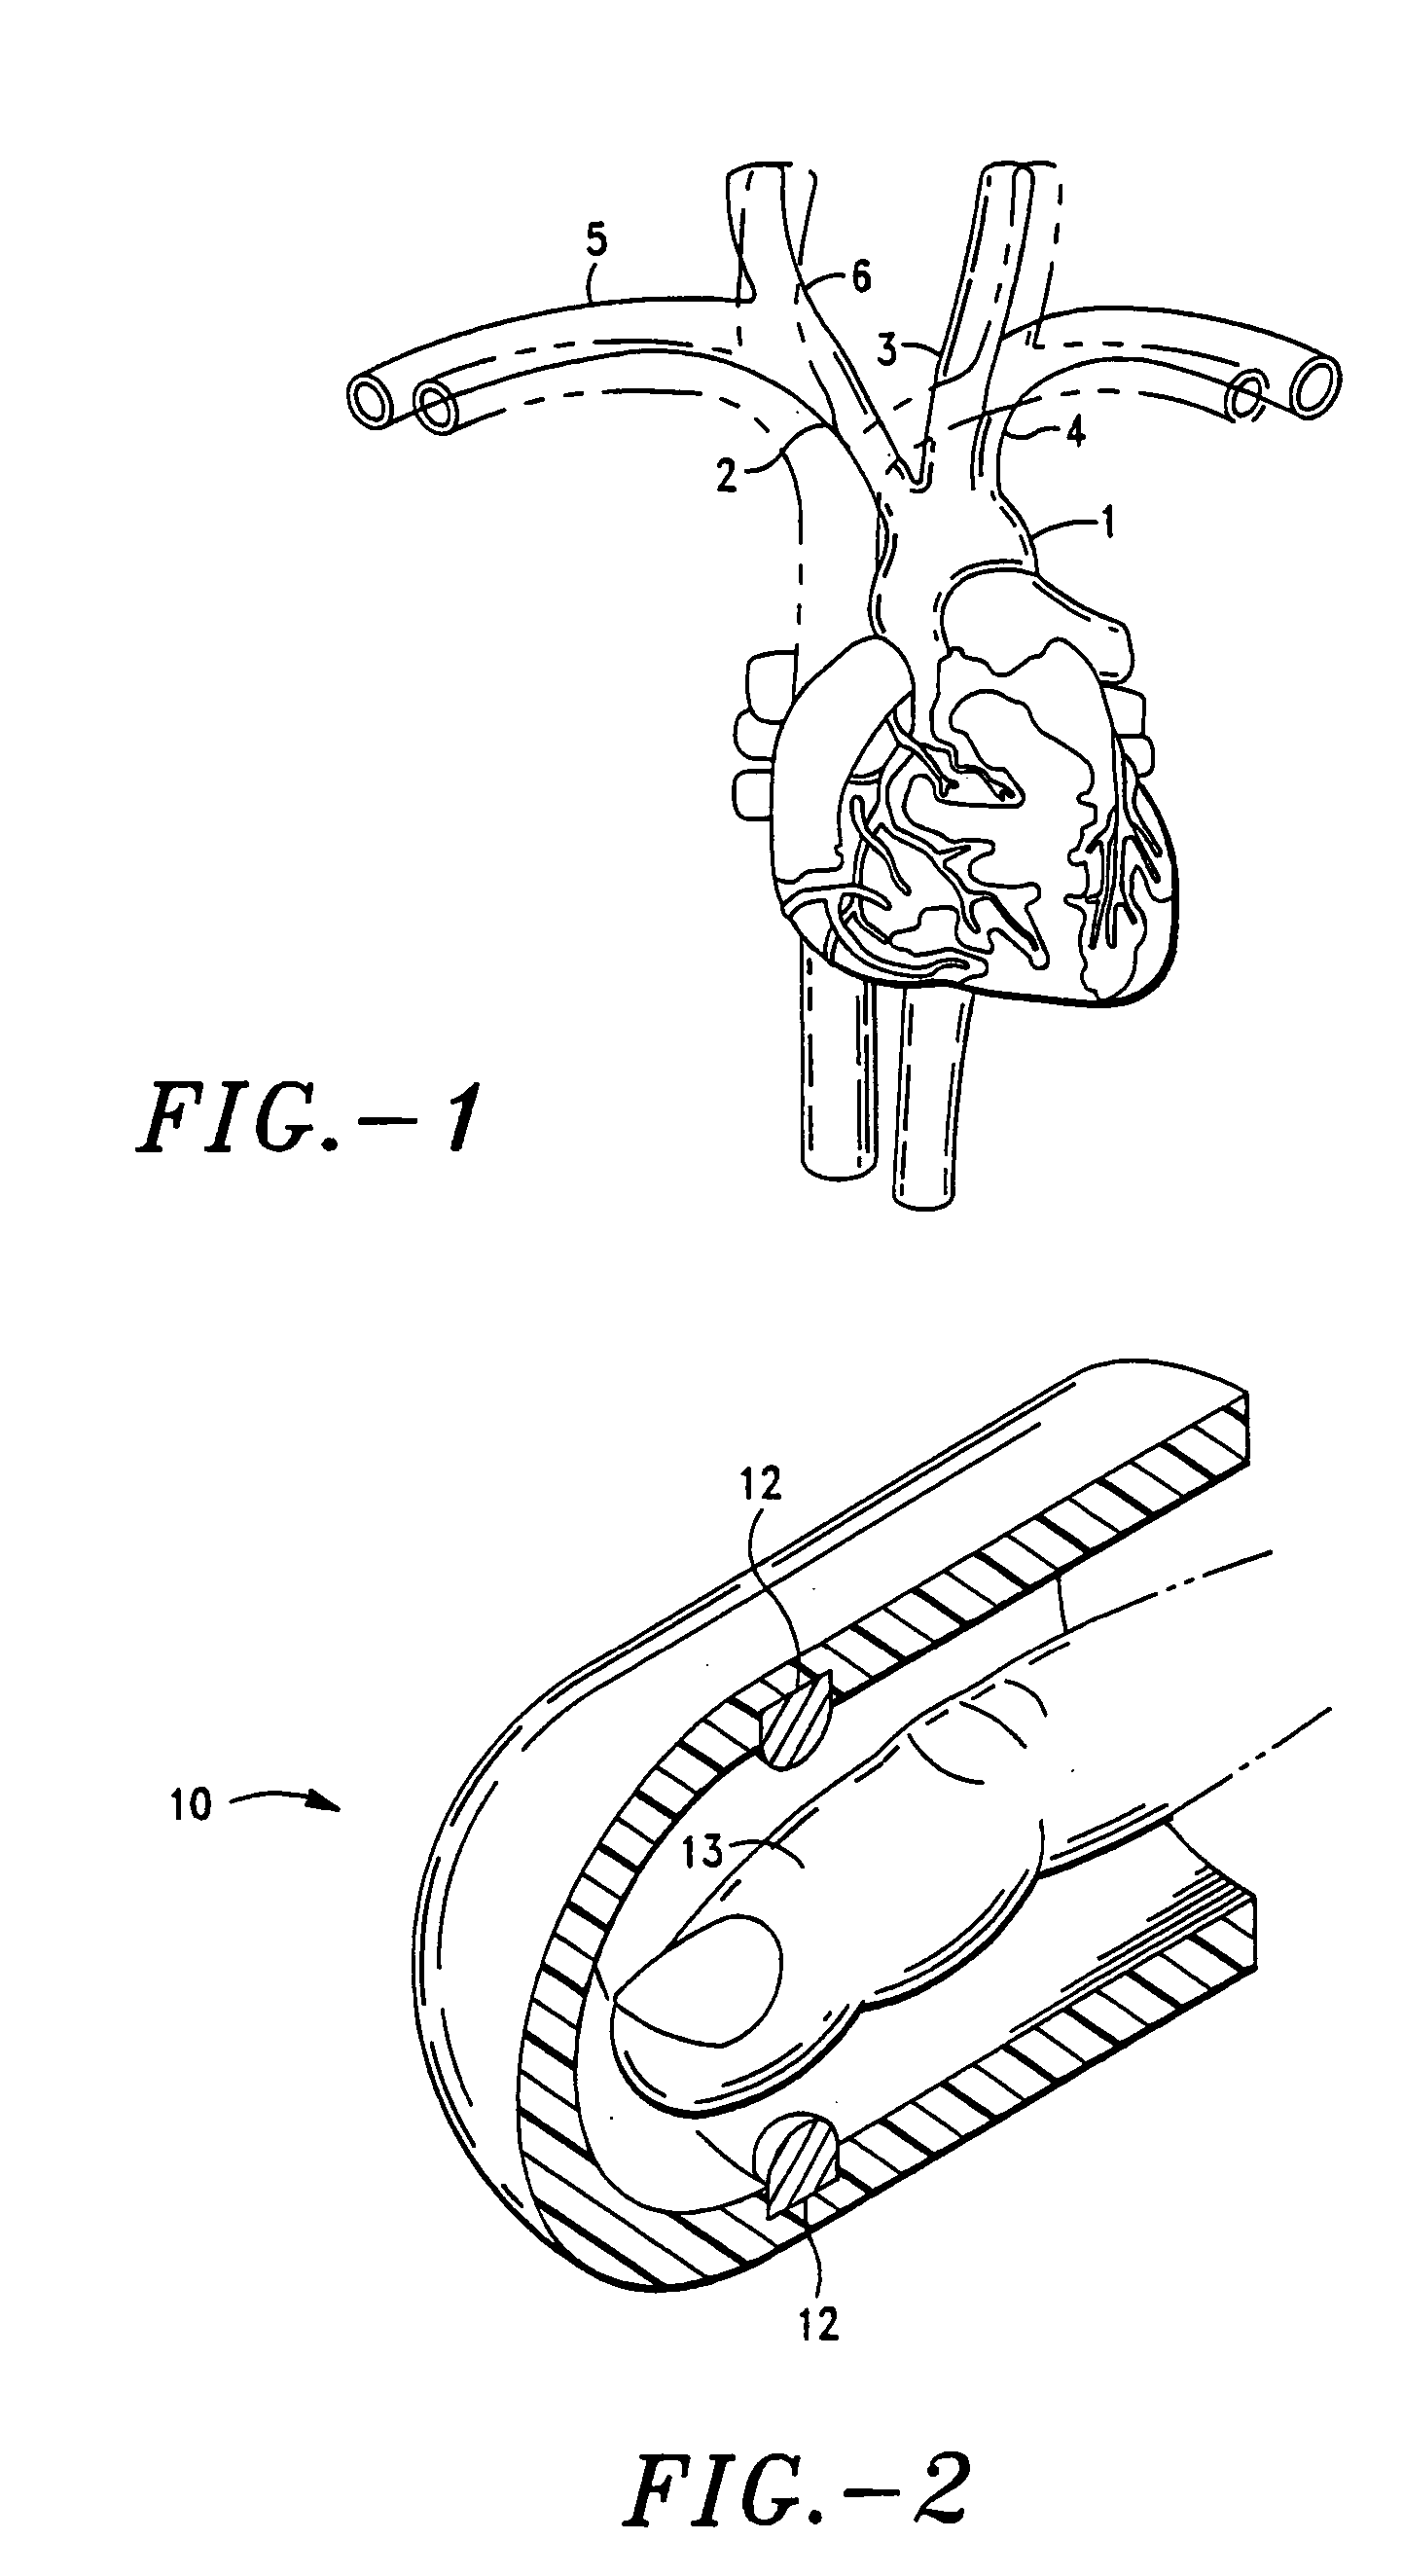 Device and method for noninvasive continuous determination of physiologic characteristics